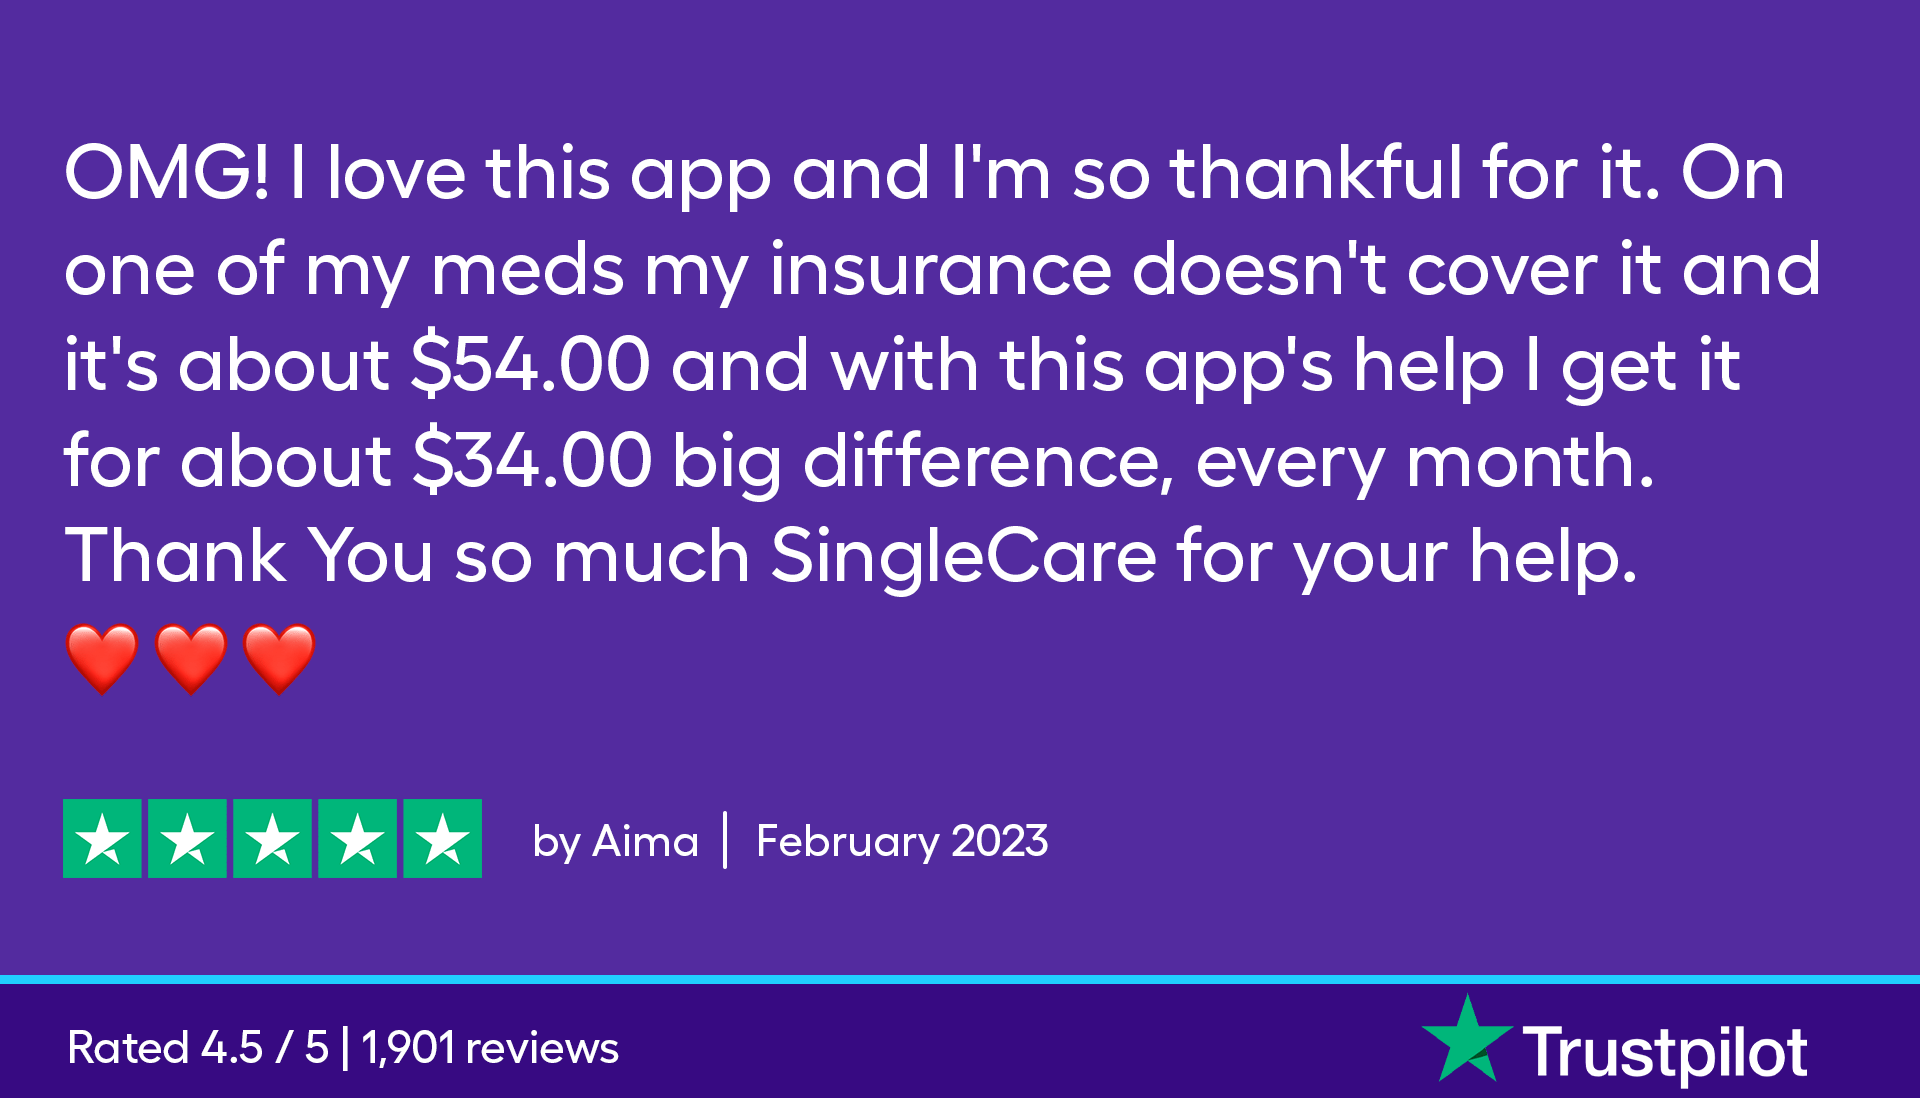 OMG! I love this app and I'm so thankful for it. On one of my meds my insurance doesn't cover it and it's about $54.00 and with this app's help I get it for about $34.00 big difference, every month. Thank You so much SingleCare for your help.